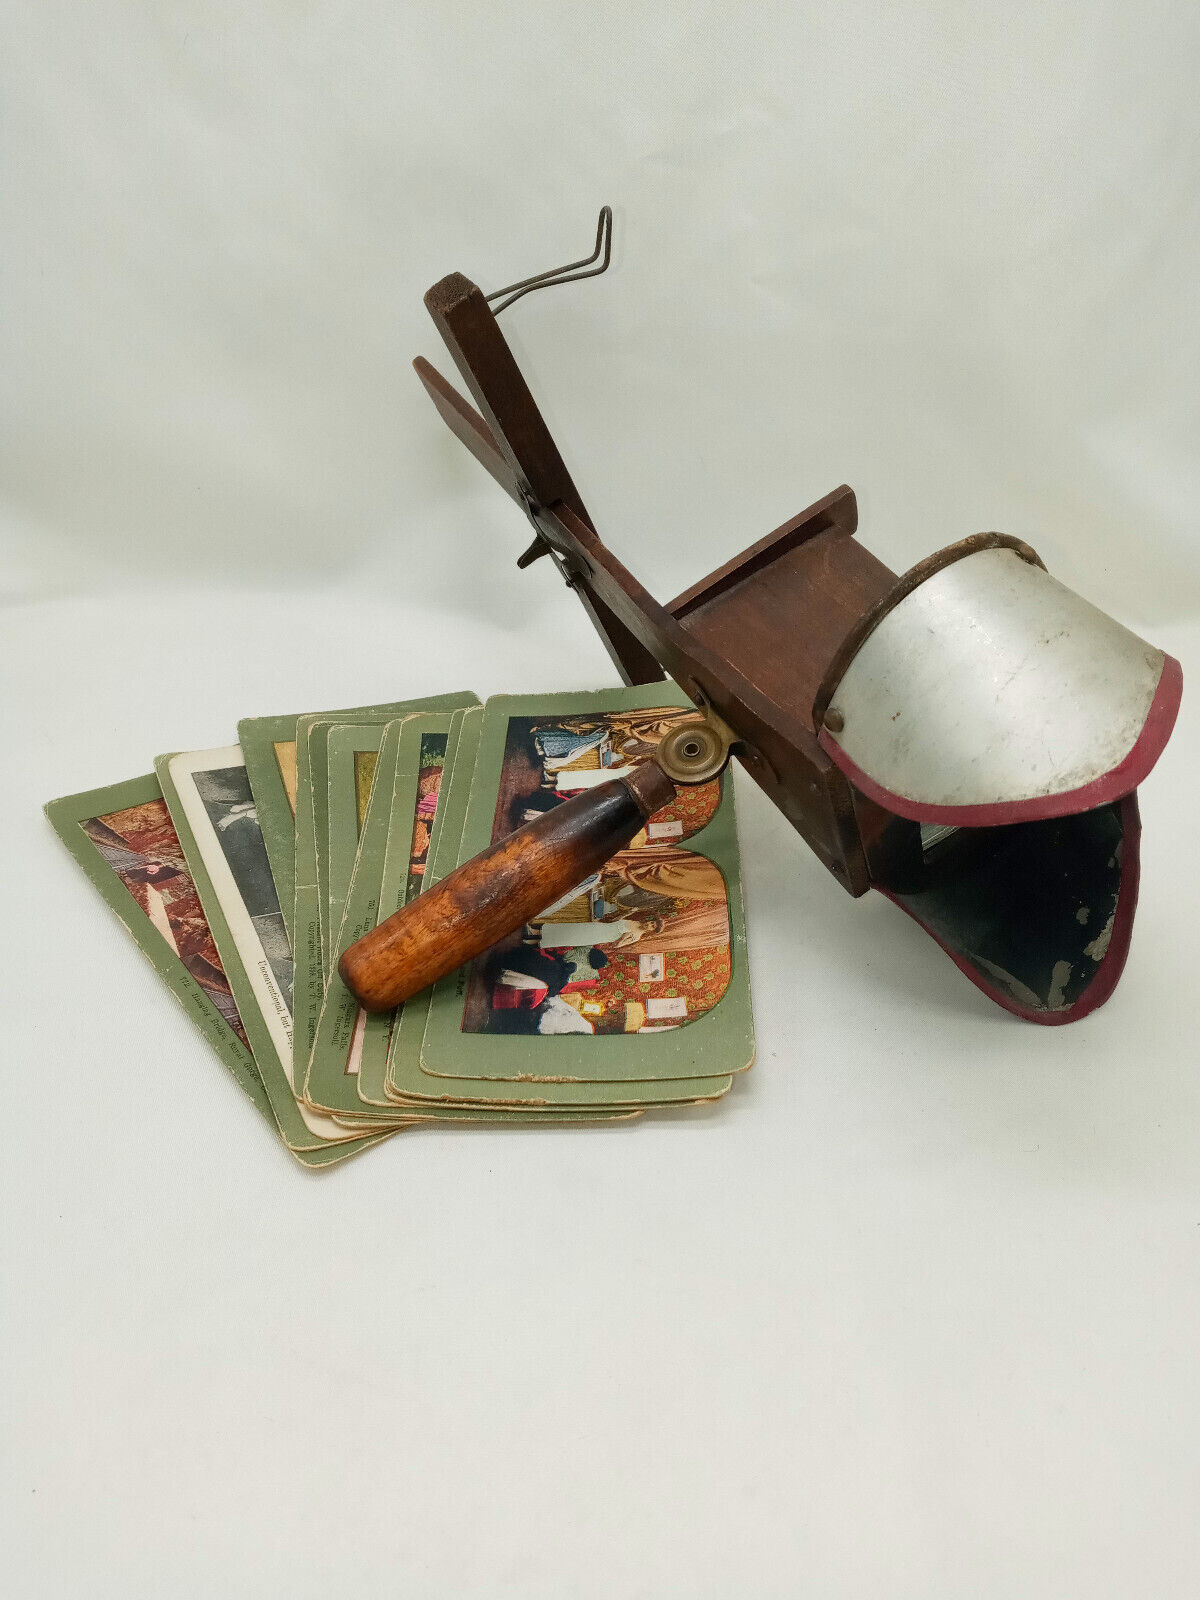 Antique Vintage Steroscope With 14 3D Viewing Cards 1898-1903